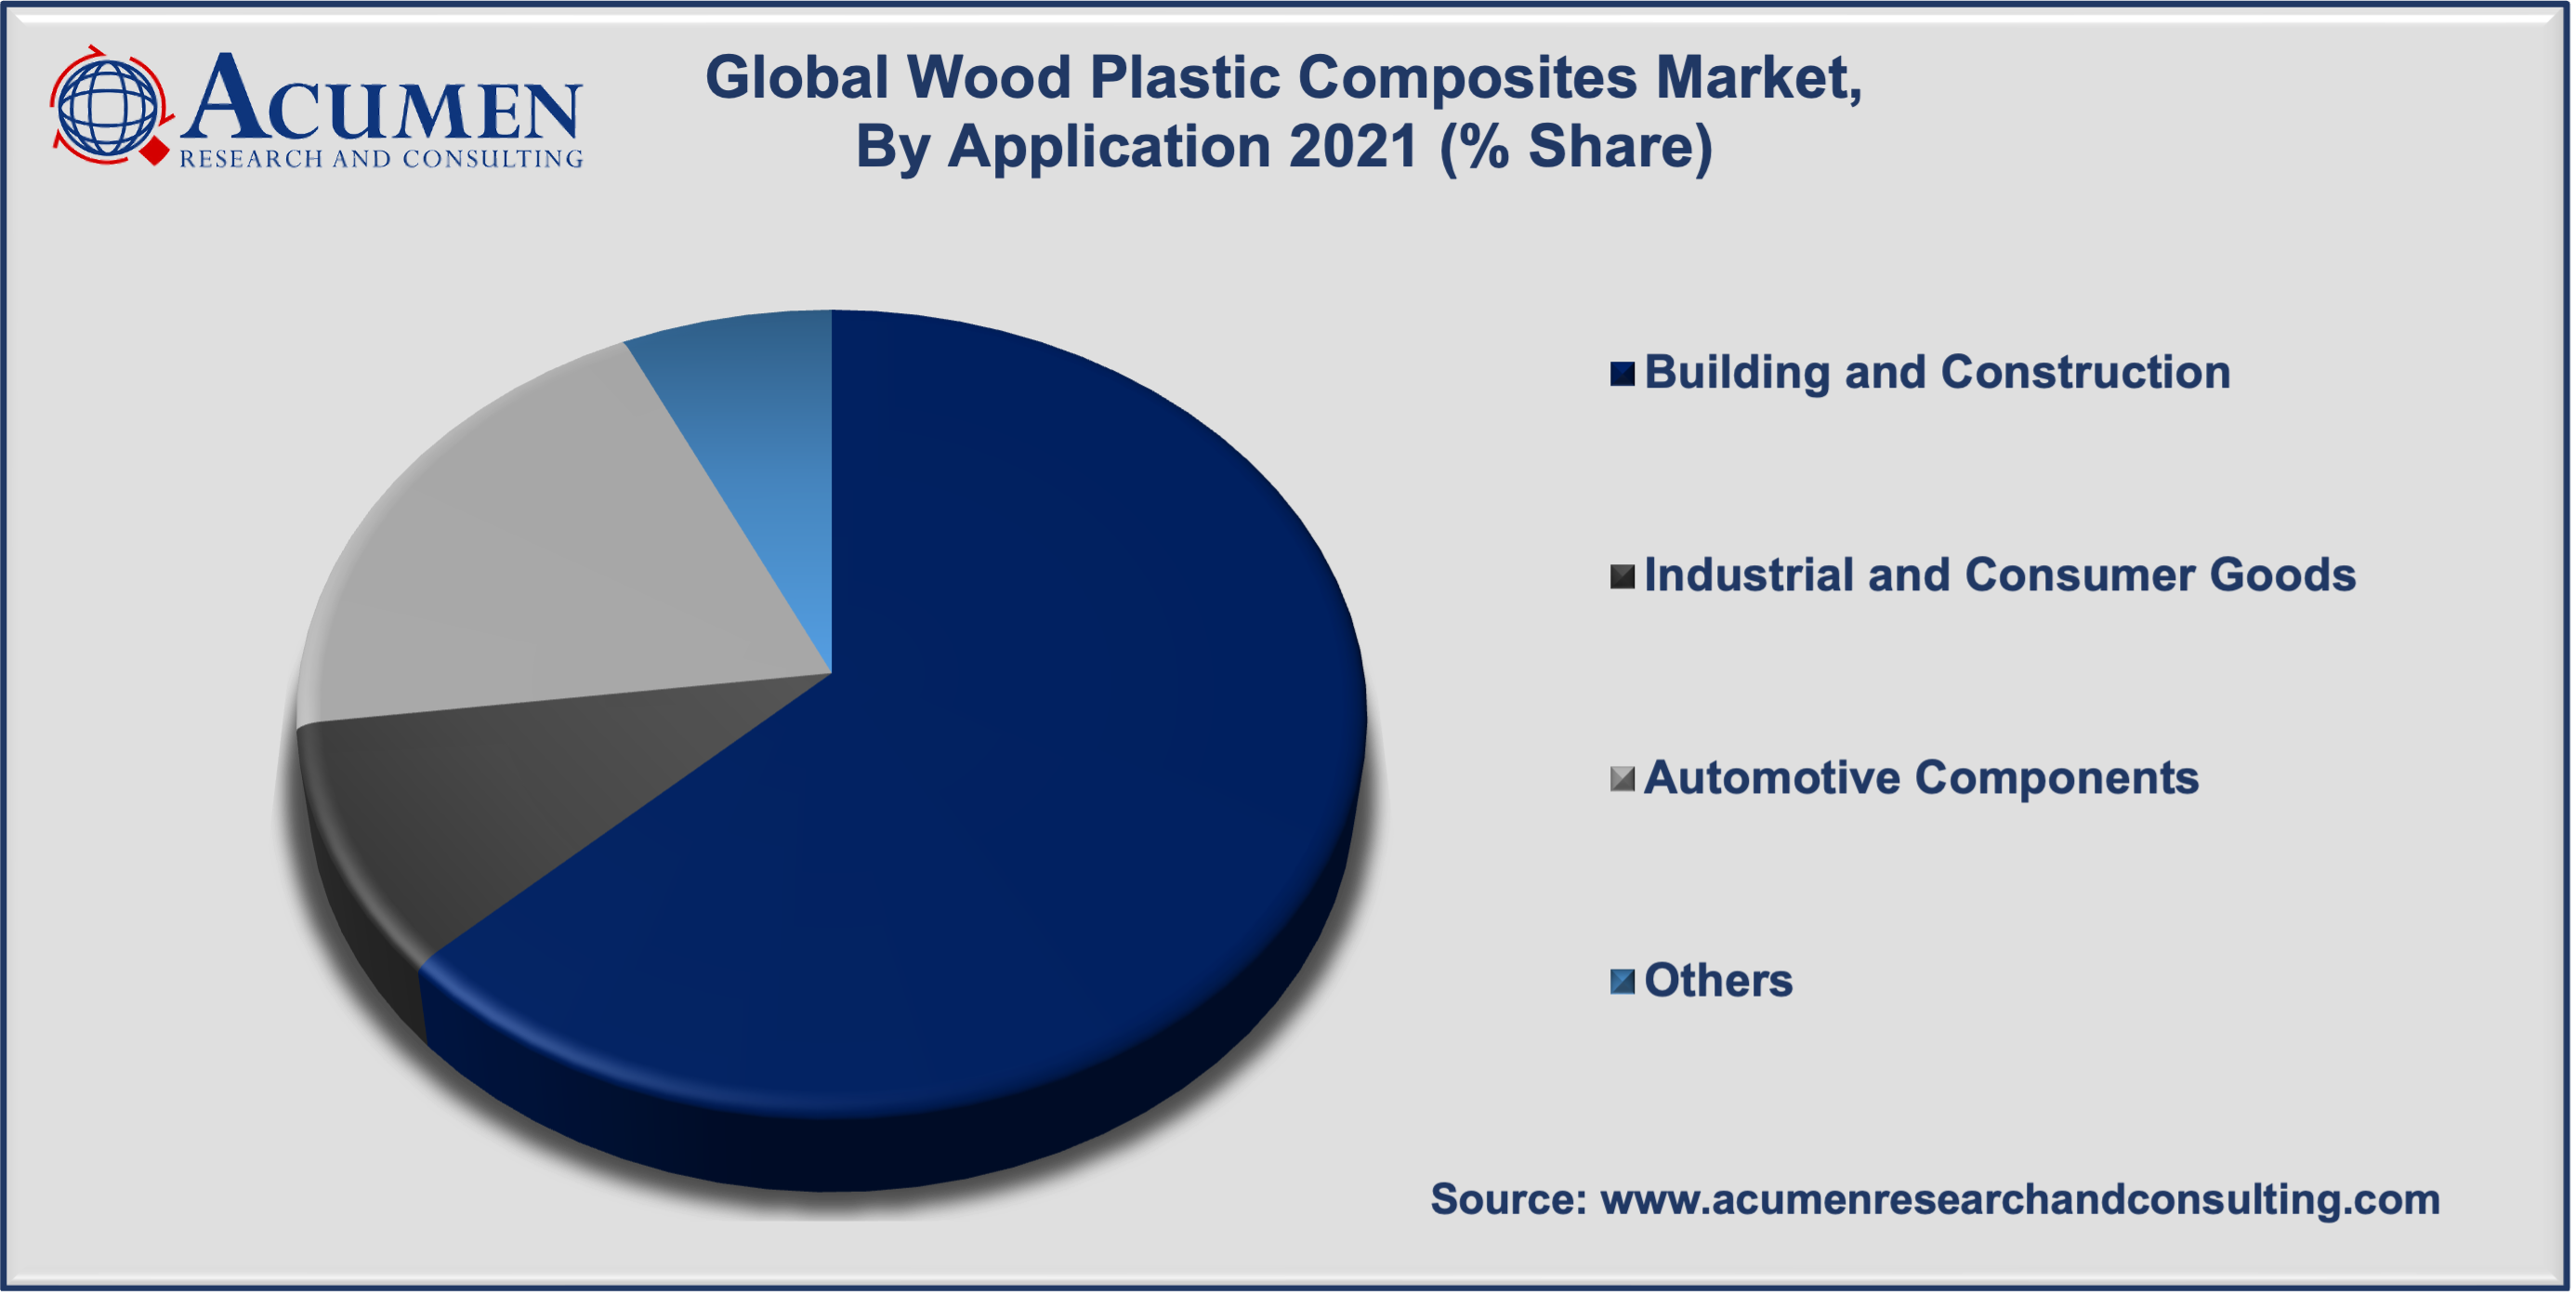 Wood Plastic Composites Market Share accounted for USD 5,582 Million in 2021 and is expected to reach USD 13,244 Million by 2030 with a considerable CAGR of 10.3% during the forecast period from 2022 to 2030.